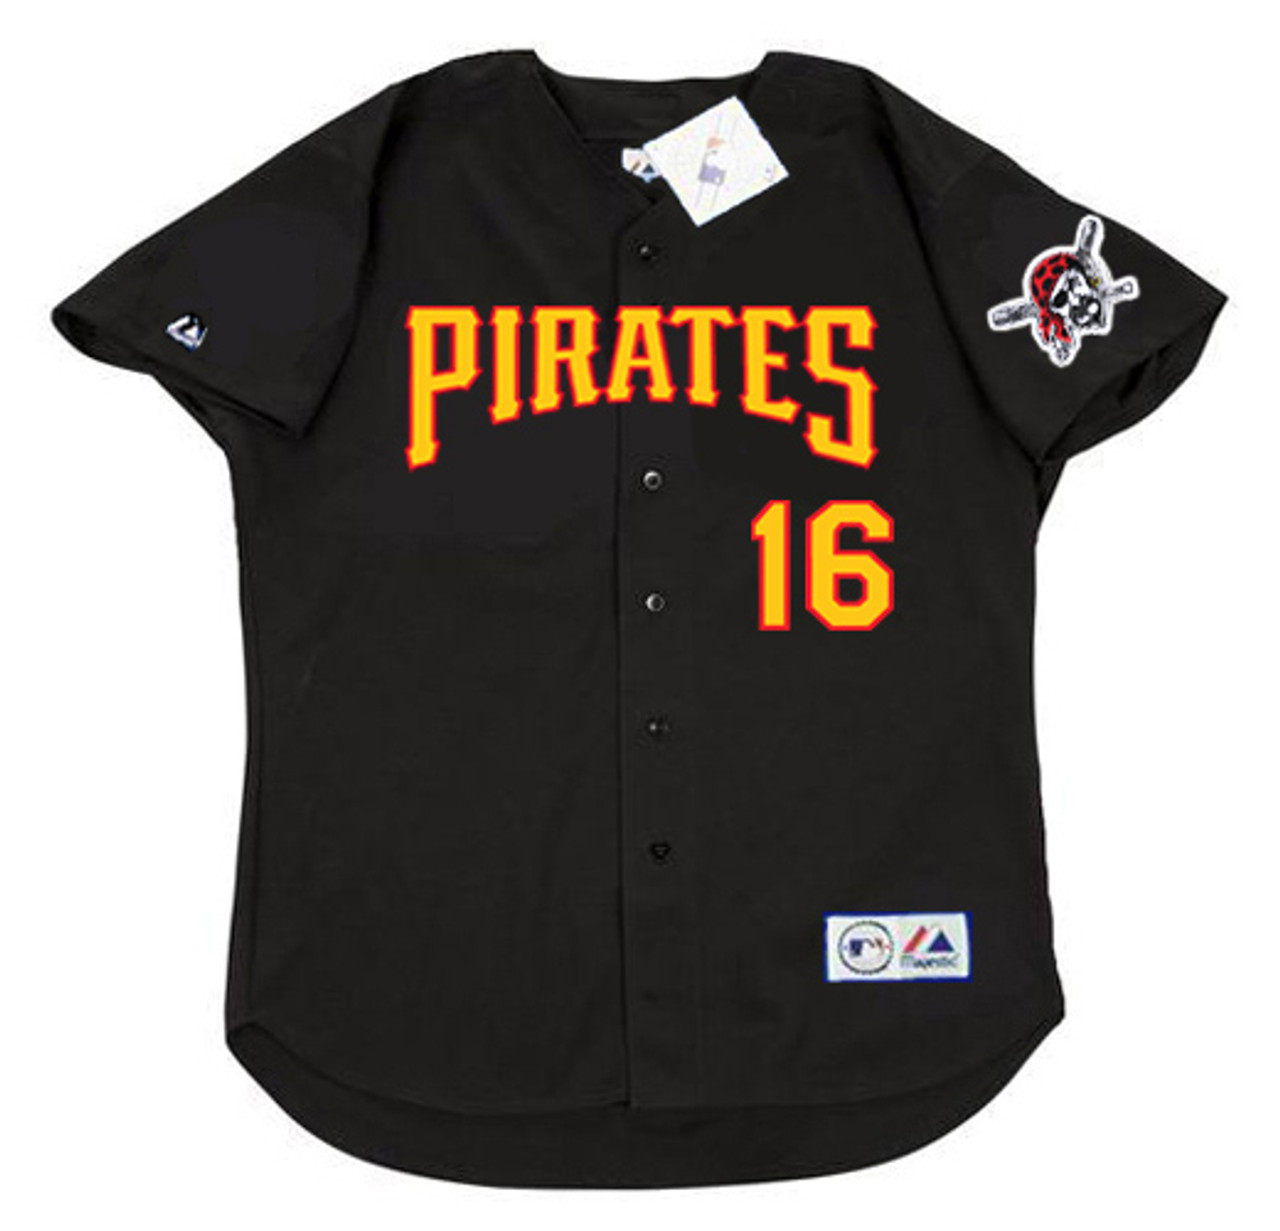 Al Oliver Jersey - Pittsburgh Pirates 1977 Cooperstown Throwback